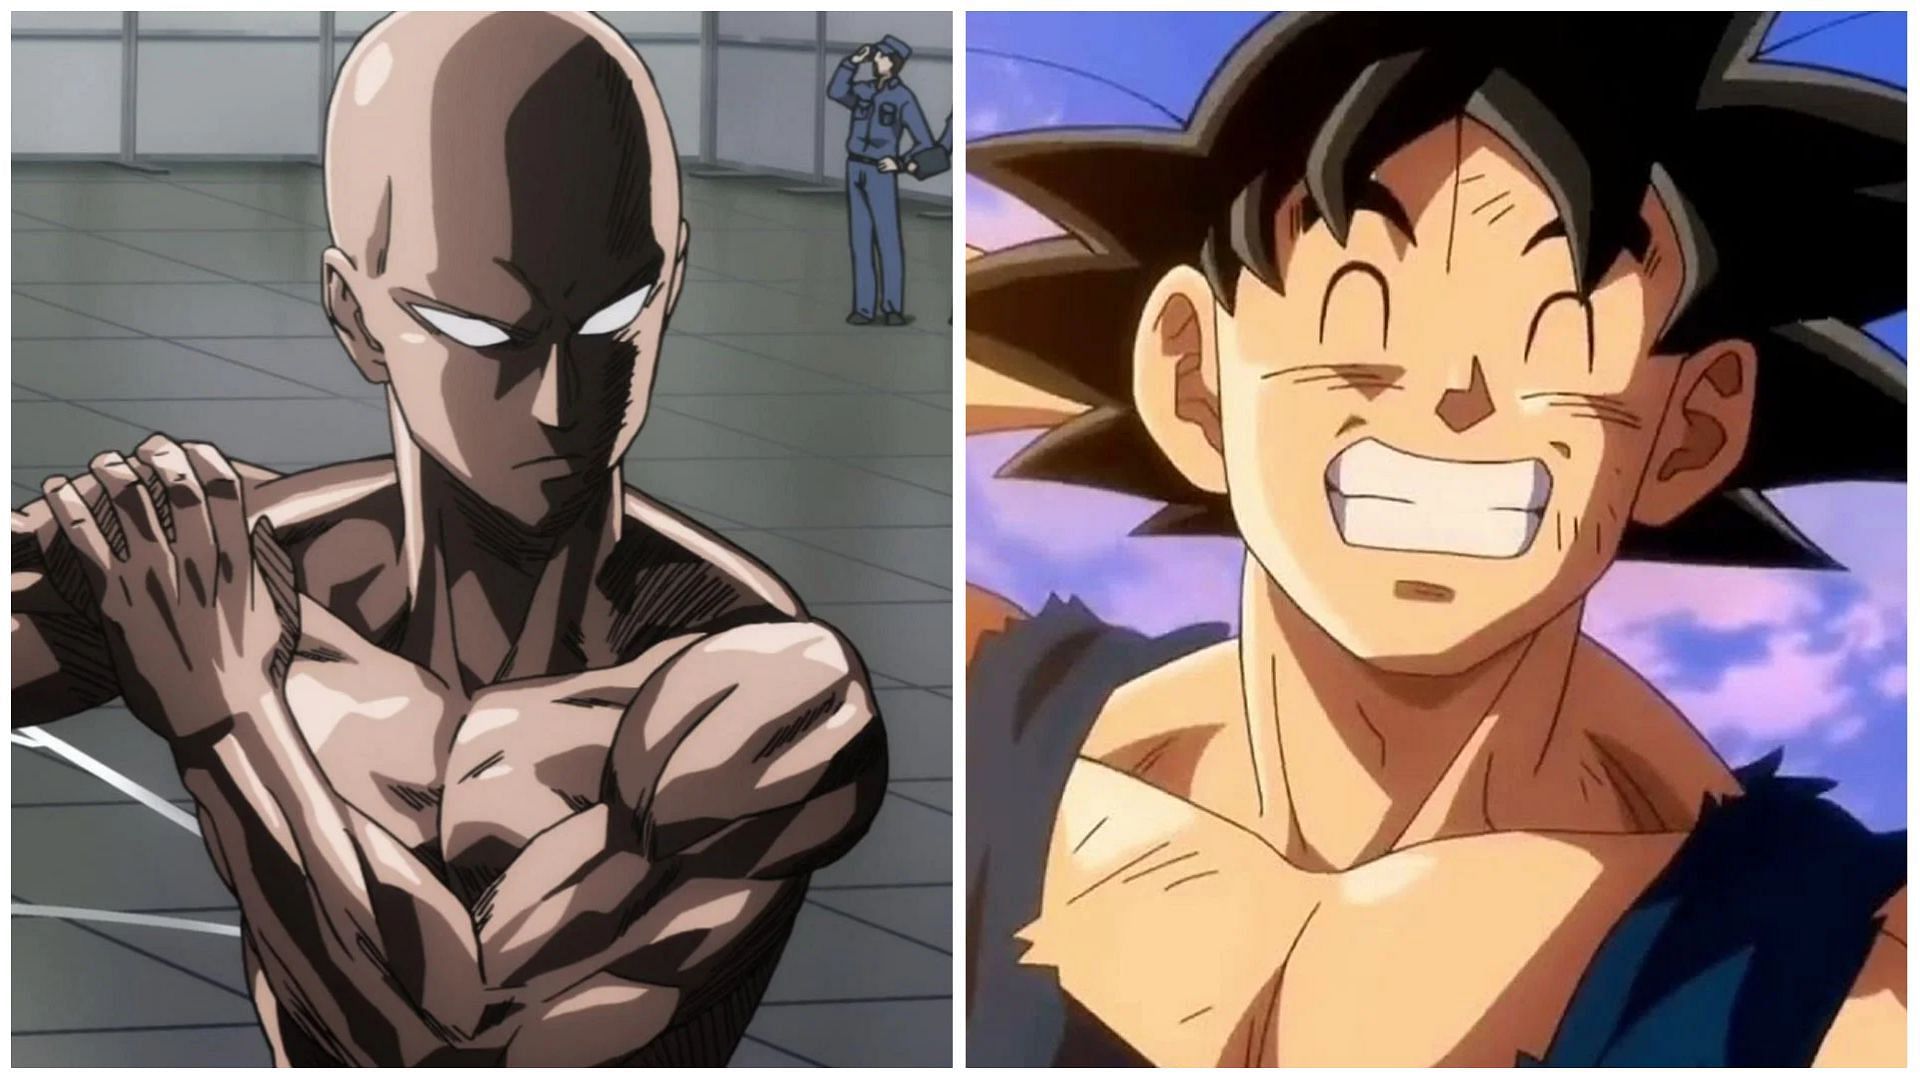 One Punch Man: Can Goku handle a Serious Punch from Saitama?